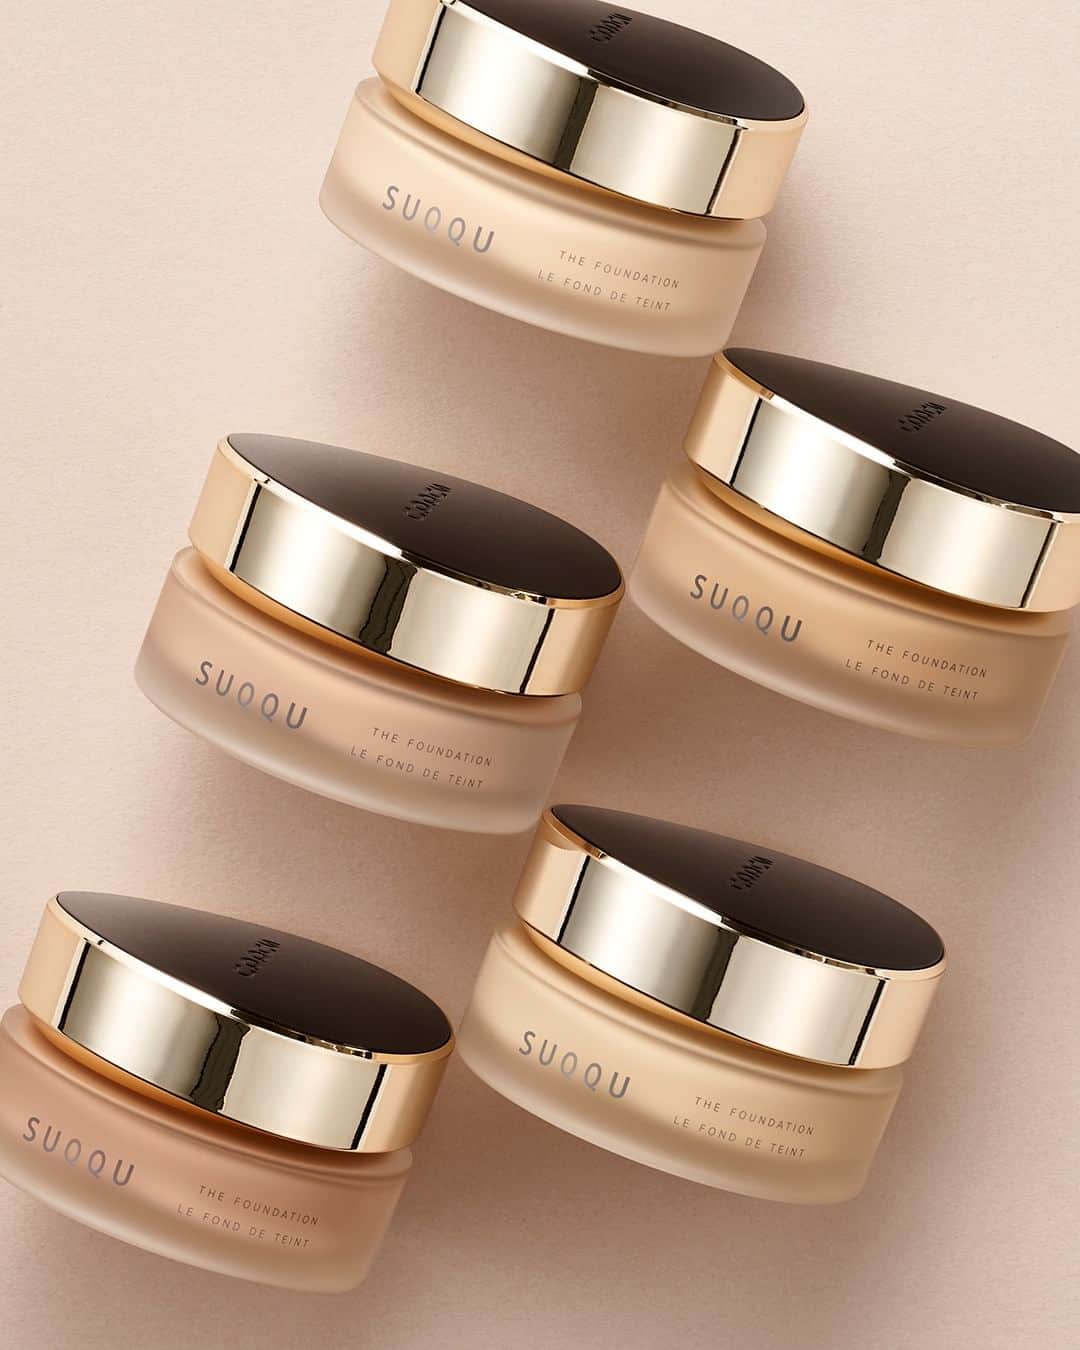 SUQQU公式Instgramアカウントのインスタグラム：「Transforms even time into glow. Moisture-rich, clean, light, and fresh glow. Pearlescent pigments in the formula reflect light for a bright, even glow. The sebum and foundation mix properly, increasing transparency and giving a smooth, natural glow. Top, middle, and last glow: changes in three stages. A beautiful, long-lasting finish is achieved by making the skin radiant.  THE FOUNDATION  時間すら艶めきに変える。 湿度をたたえた、清潔感のある淡くフレッシュな艶。 配合したパールが光を反射し、明るく、均一に輝く艶。 皮脂とファンデーションがほどよくなじみ、塗膜の透明感が増し、なめらかで自然な艶に。 トップ・ミドル・ラストの艶、三変化で、長時間美しい仕上がりが続く。  ザ ファンデーション  #SUQQU #スック #jbeauty #cosmetics #SUQQU20th #SUQQUbasemakeup #ザファンデーション」